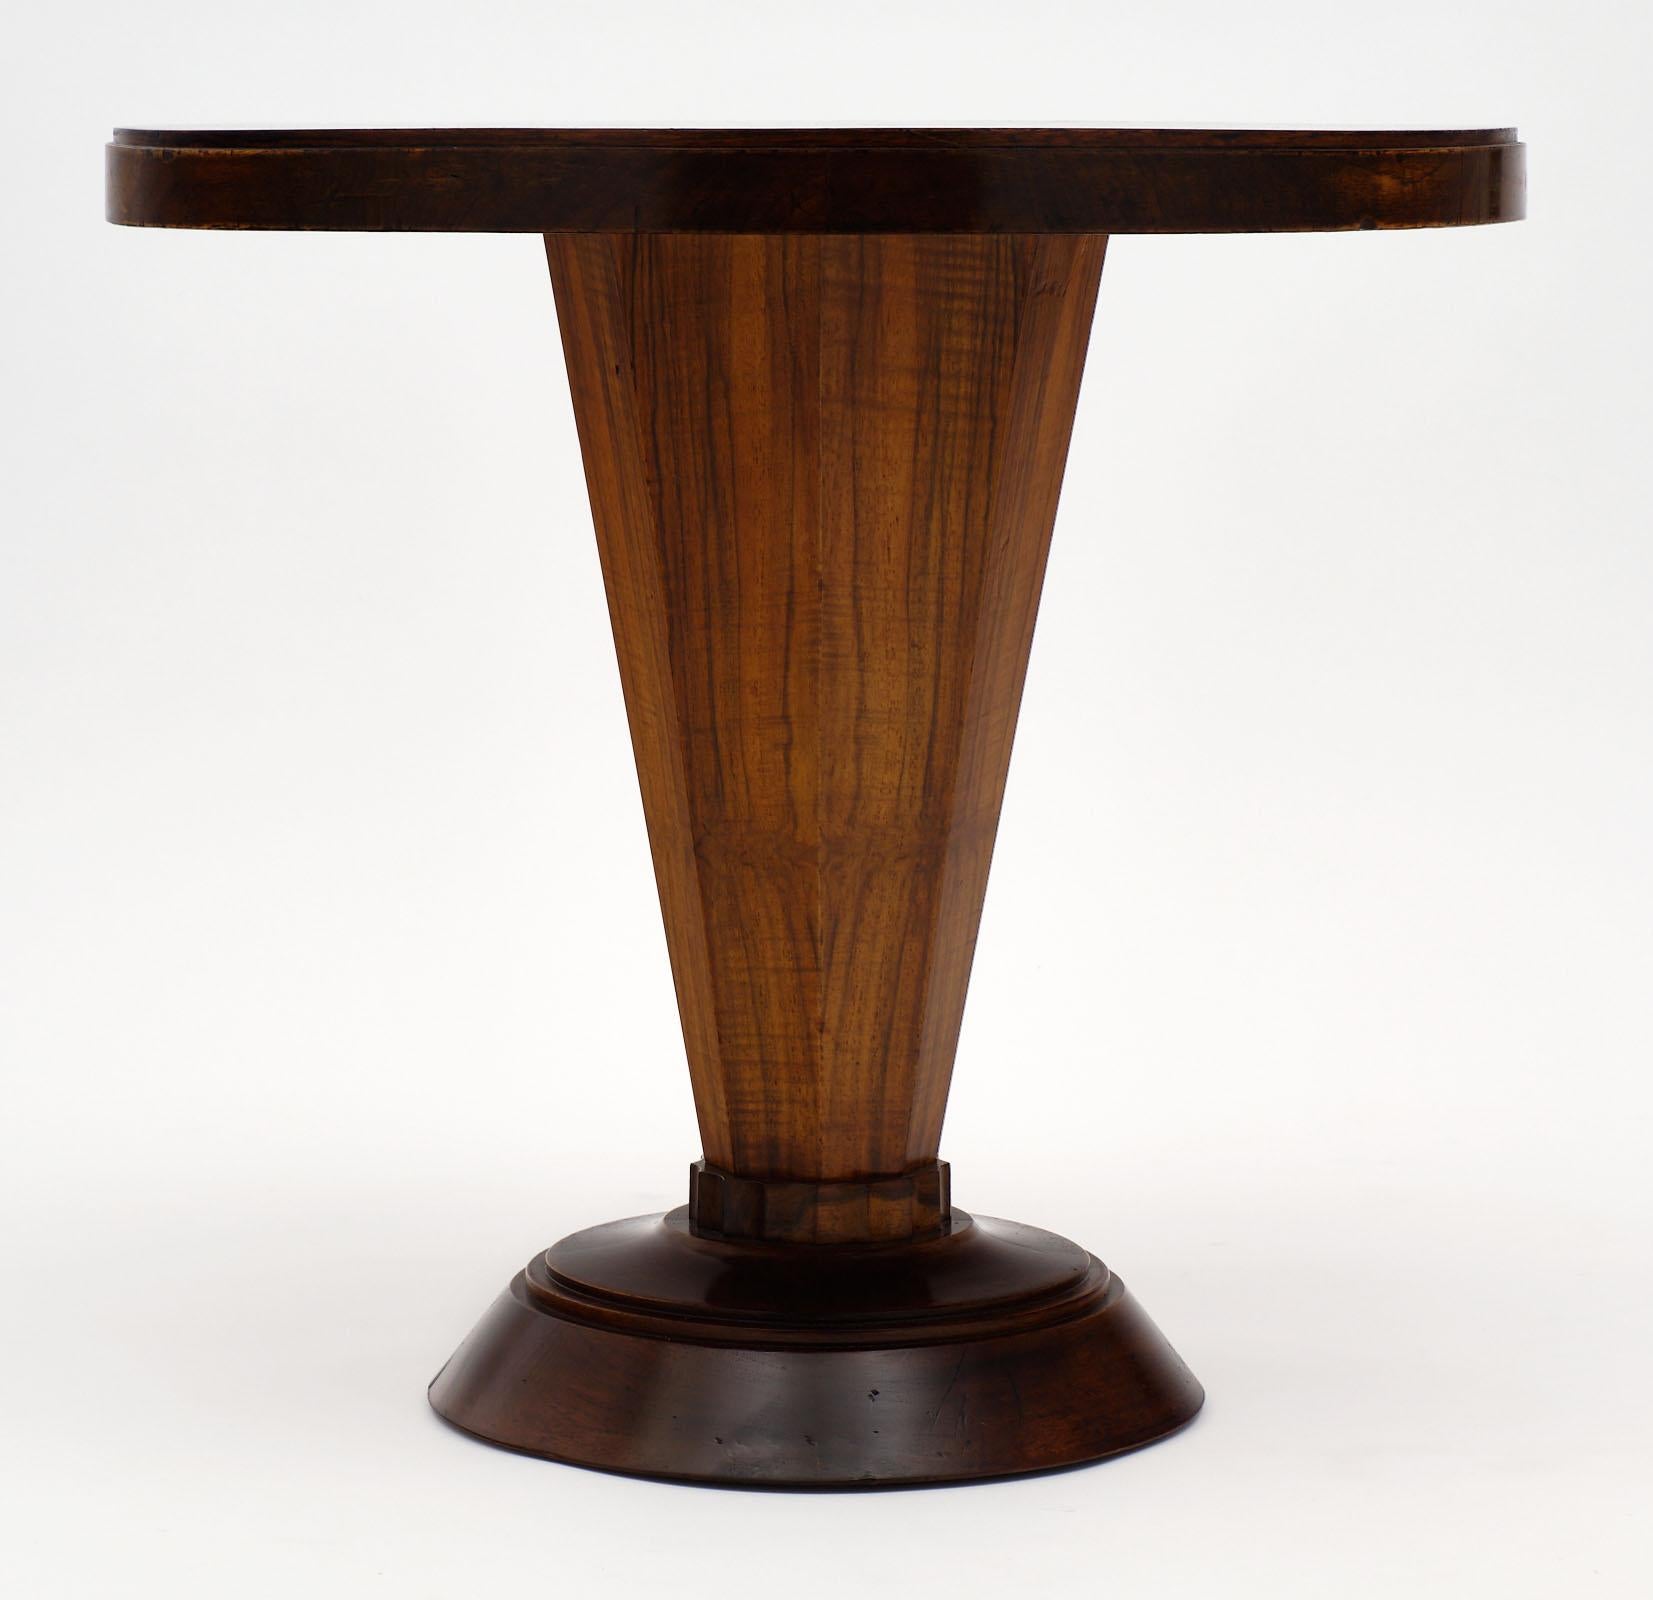 Art Deco period walnut gueridon from France. This piece is made of both solid and veneered walnut with a bold shape. We love the unique quality of this table, the lines and beautiful wood.